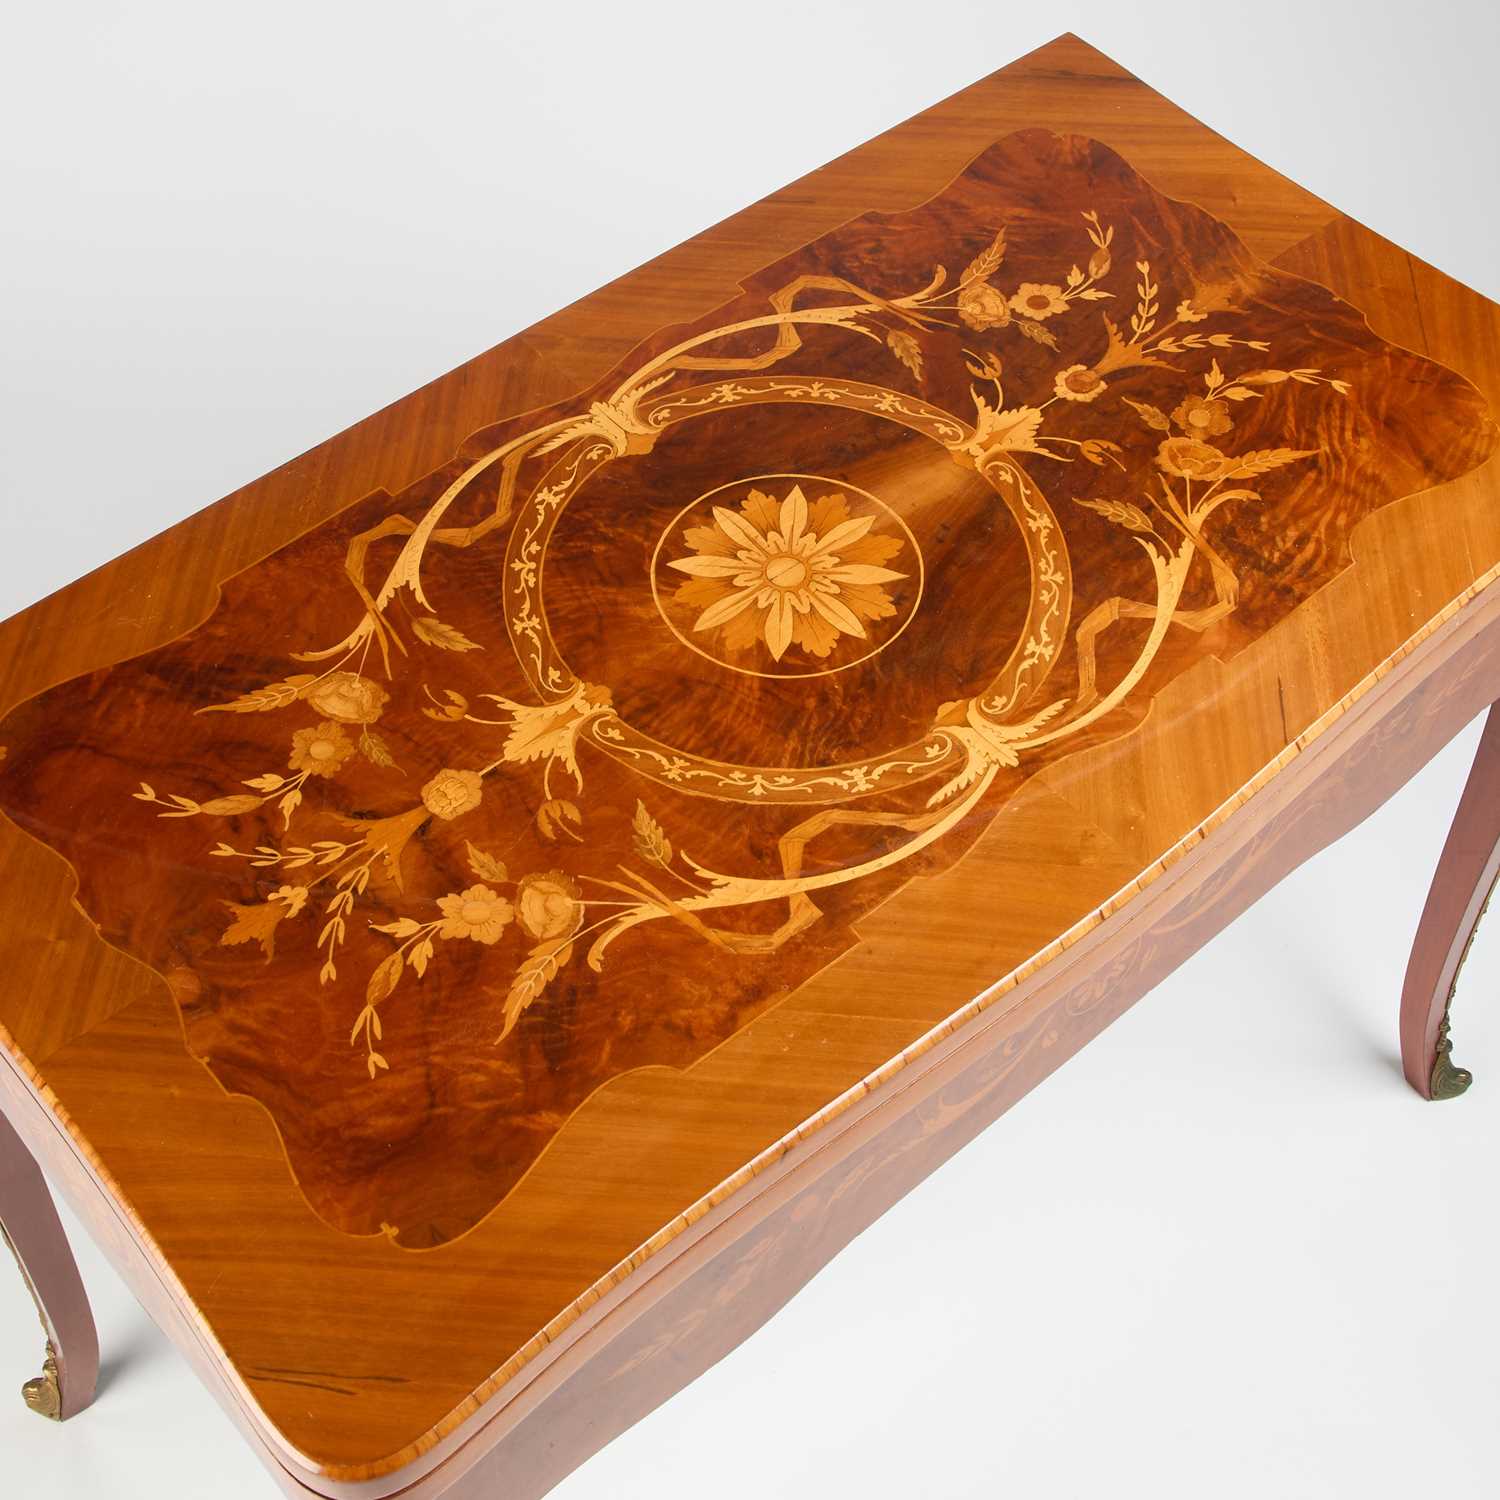 A CONTINENTAL FLORAL MARQUETRY FOLDOVER GAMES TABLE - Image 4 of 4